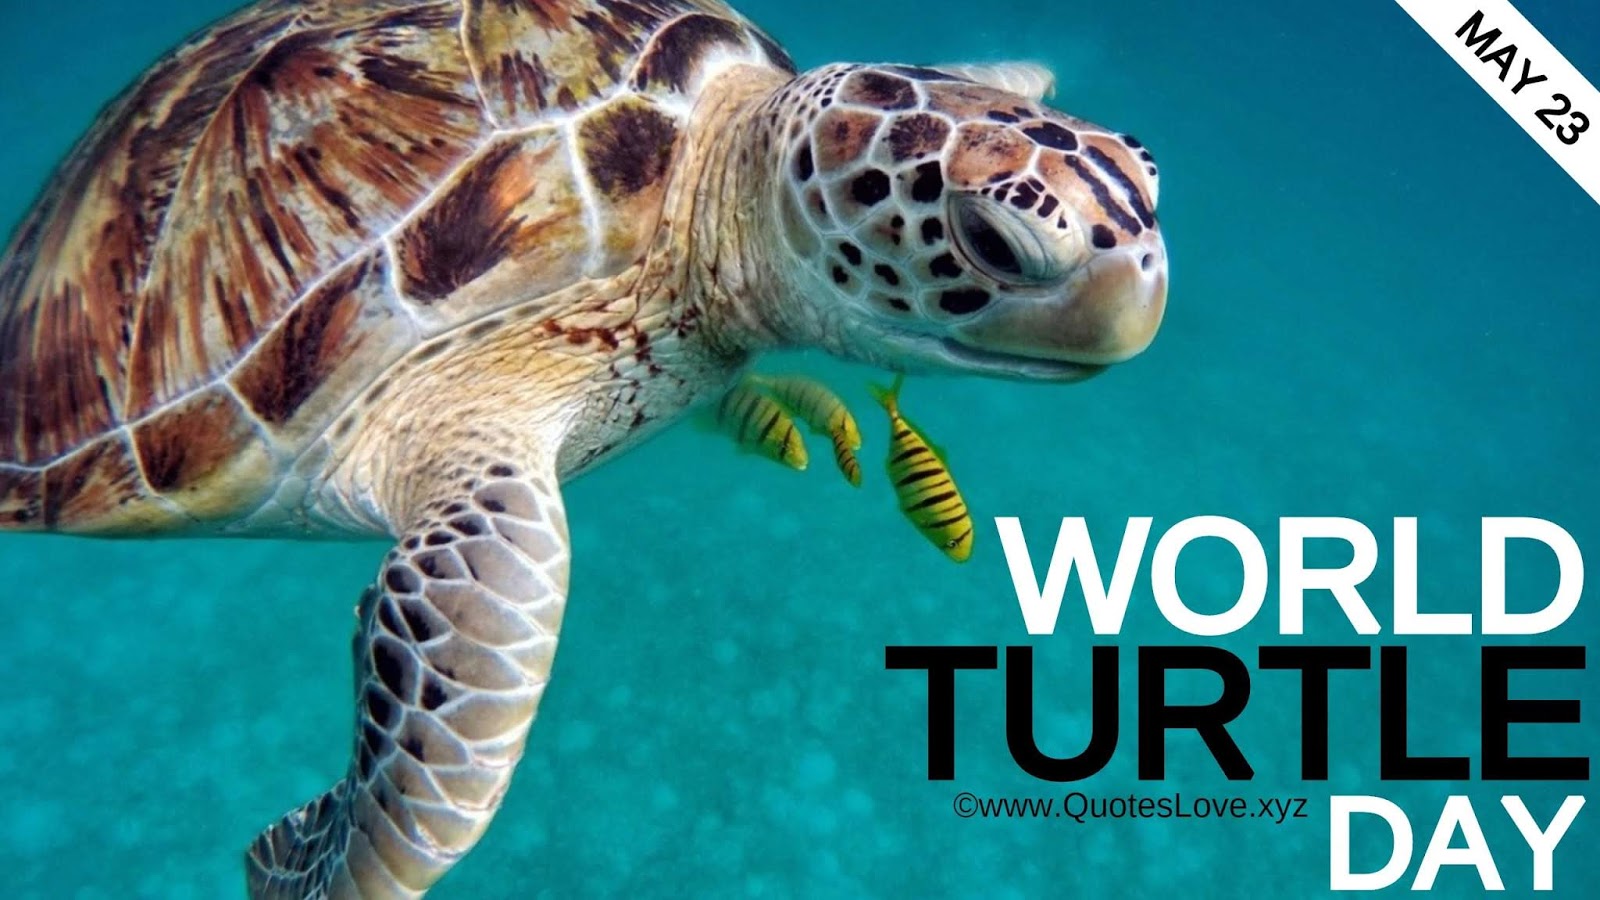 22 Best World Turtle Day 21 Quotes Sayings Messages Greetings Facts Images Pictures Photos Wallpapers